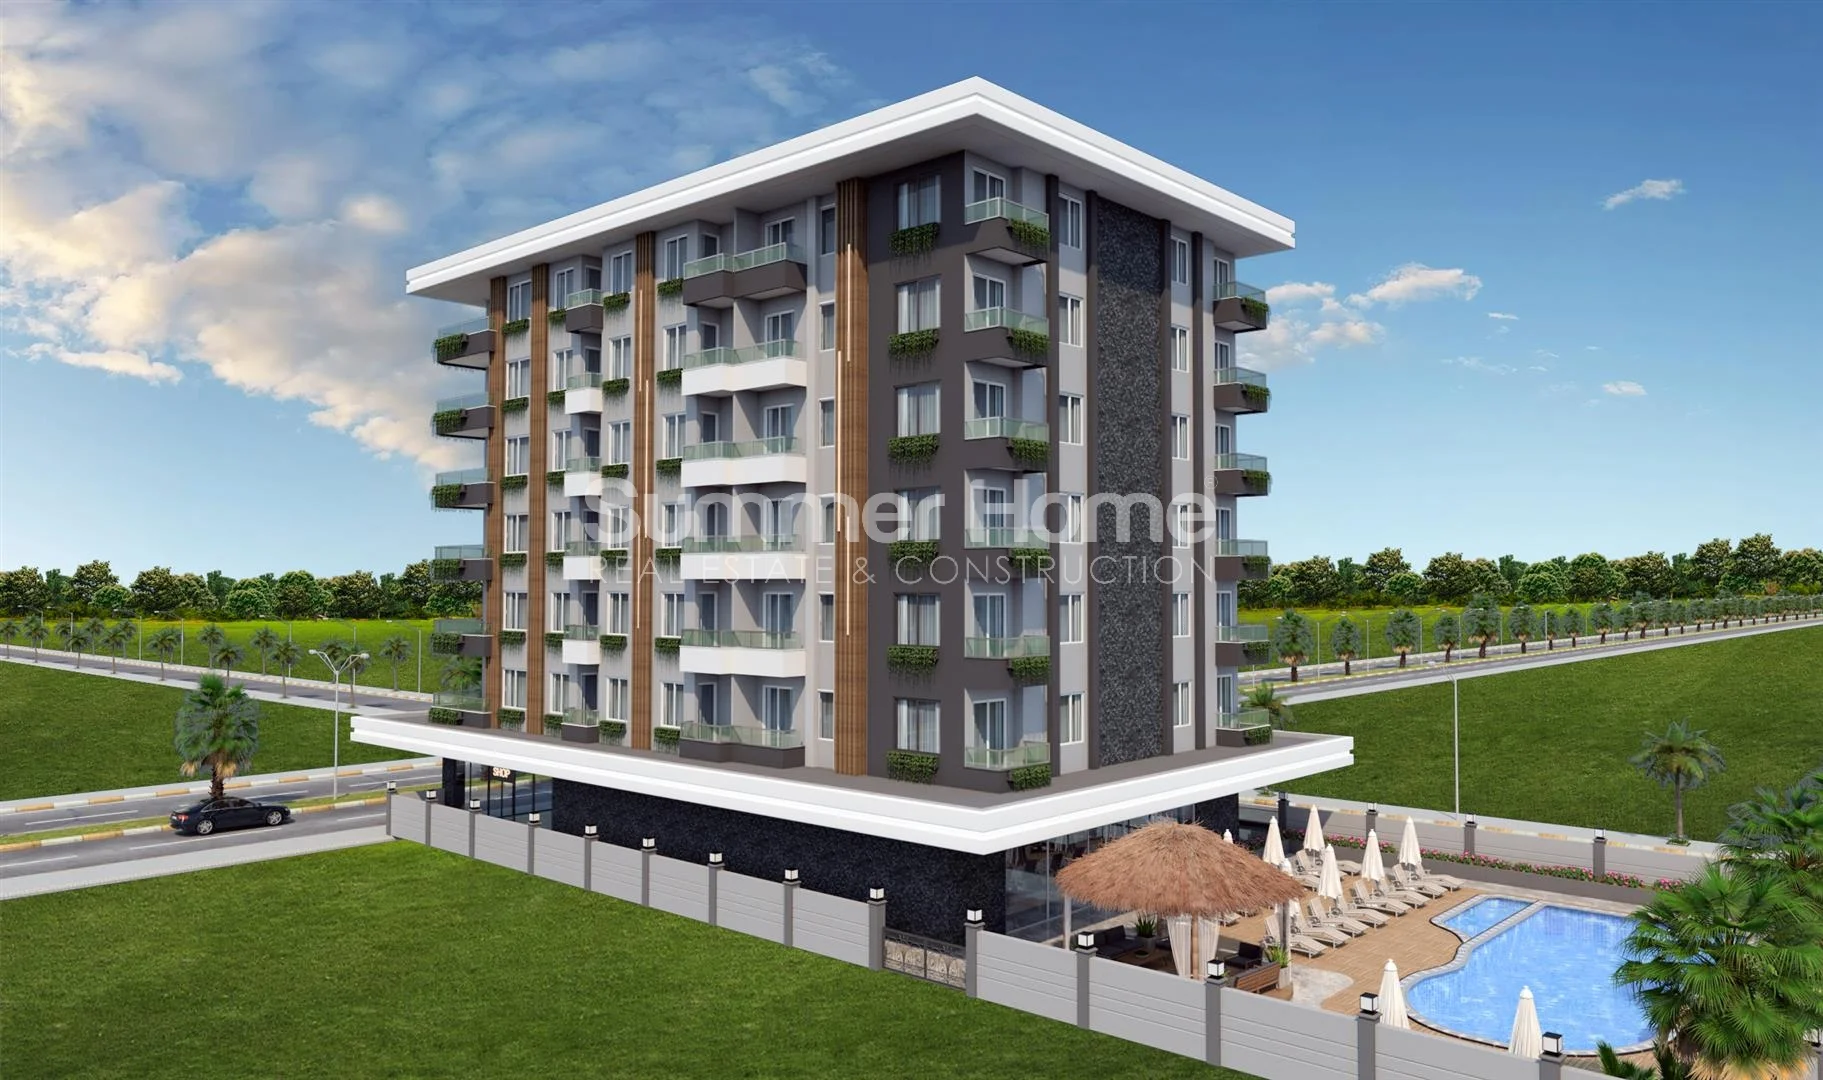 Chic and sleek apartments centrally located in Alanya General - 4